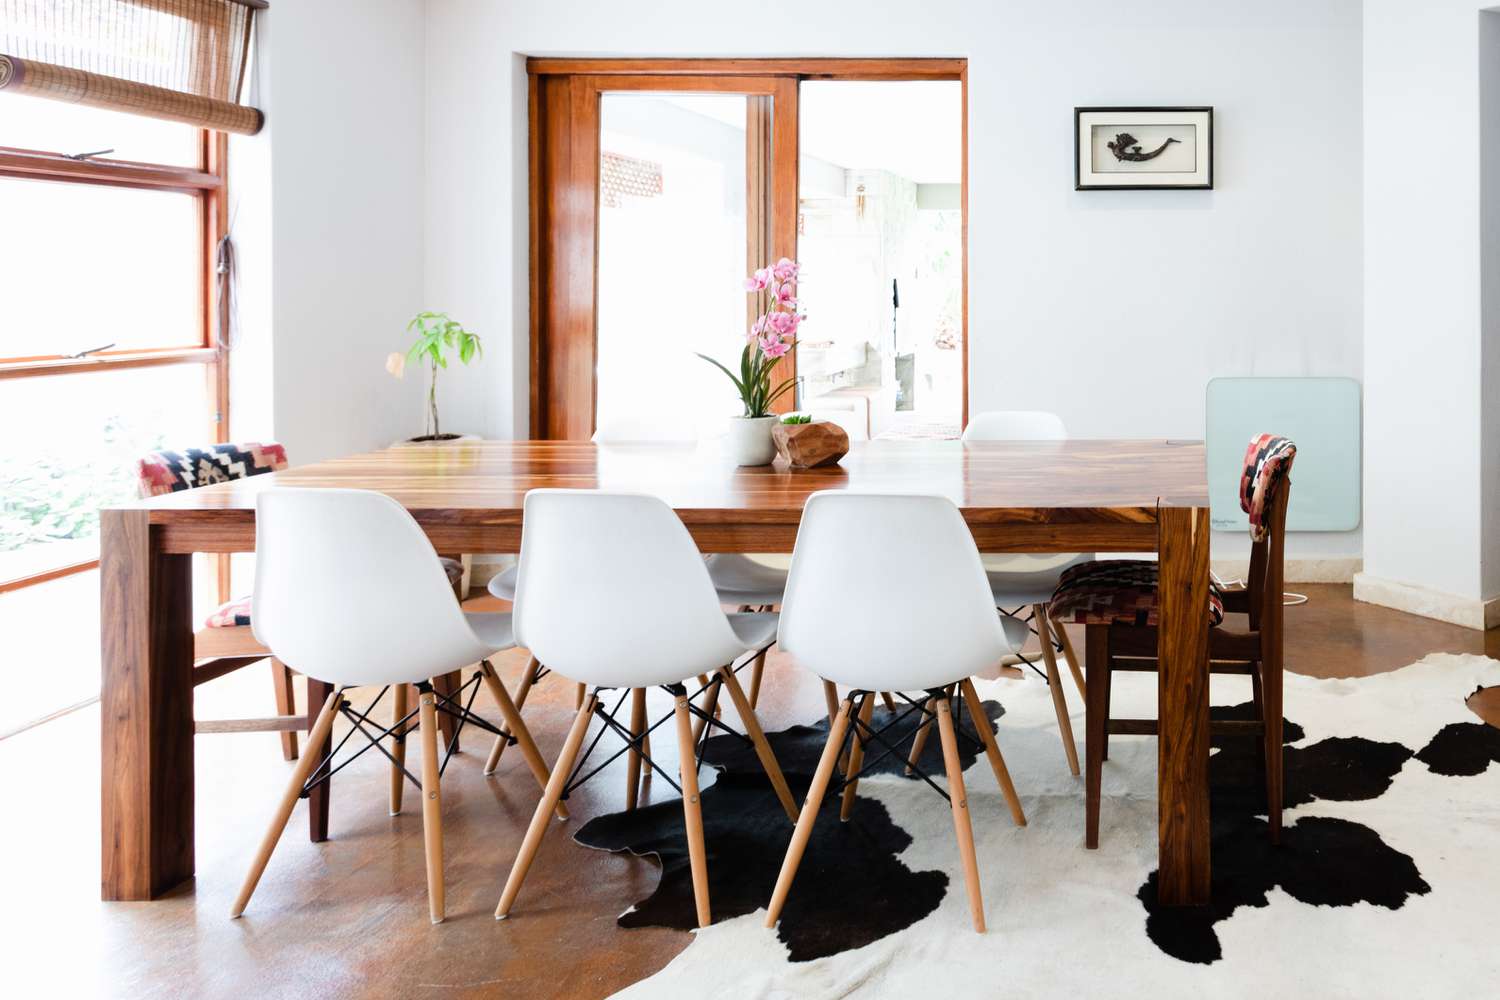 What Is The Standard Width Of A Dining Table?